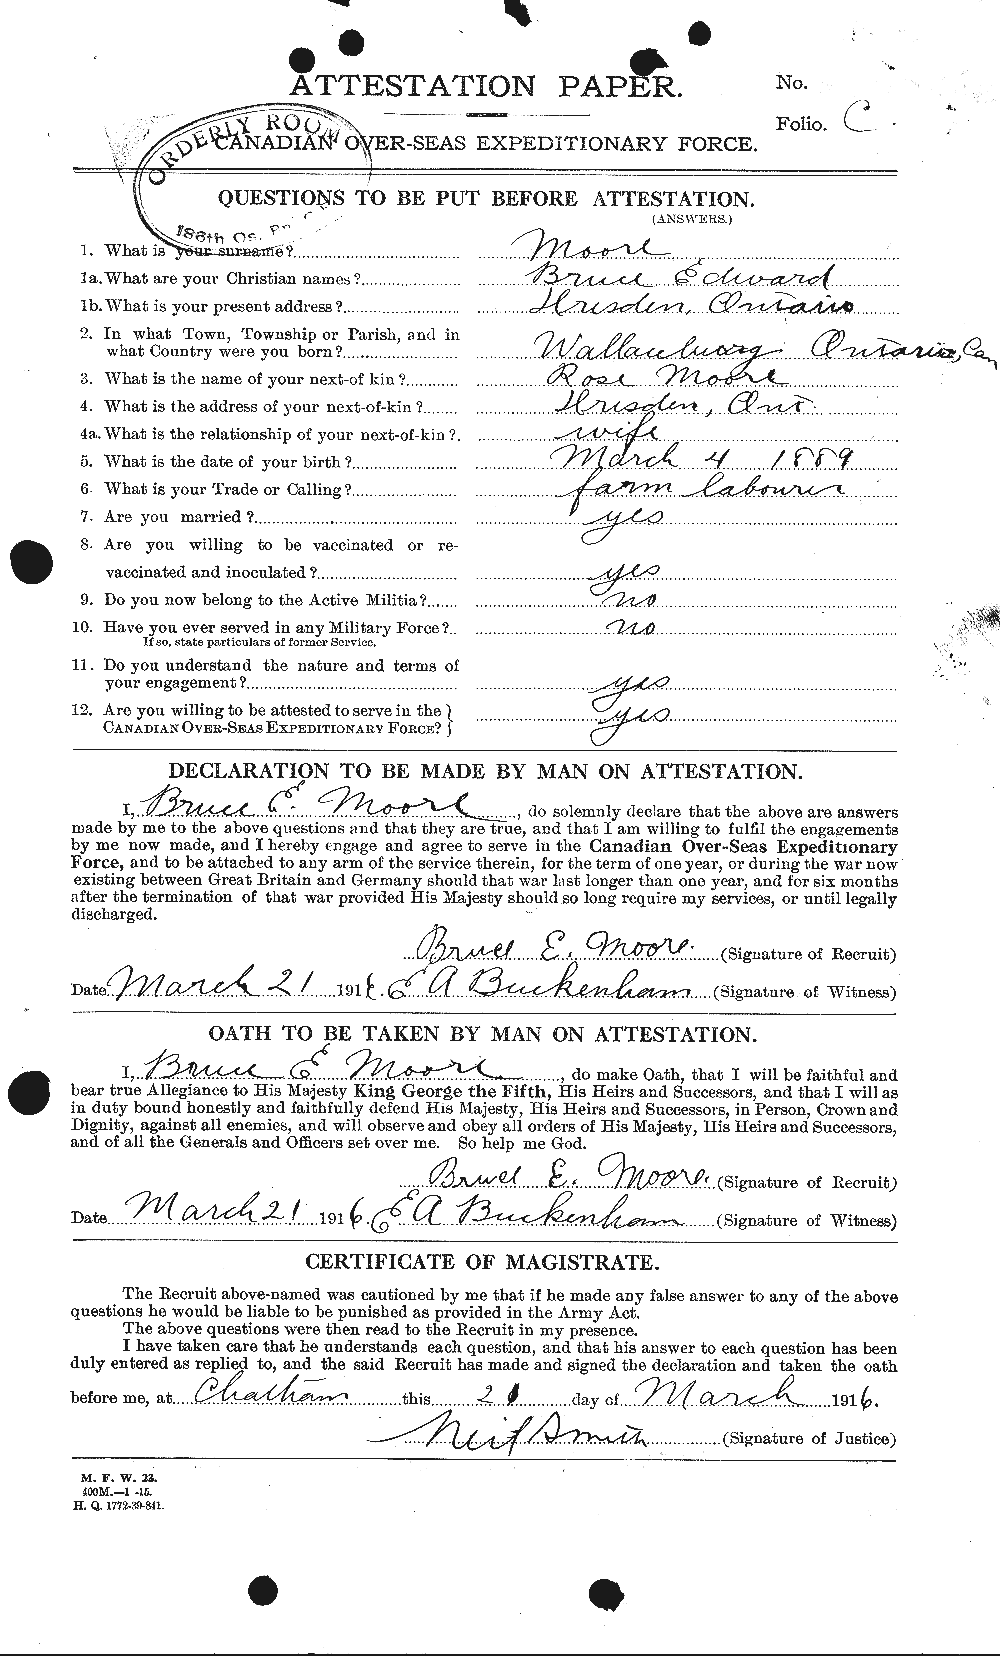 Personnel Records of the First World War - CEF 506467a